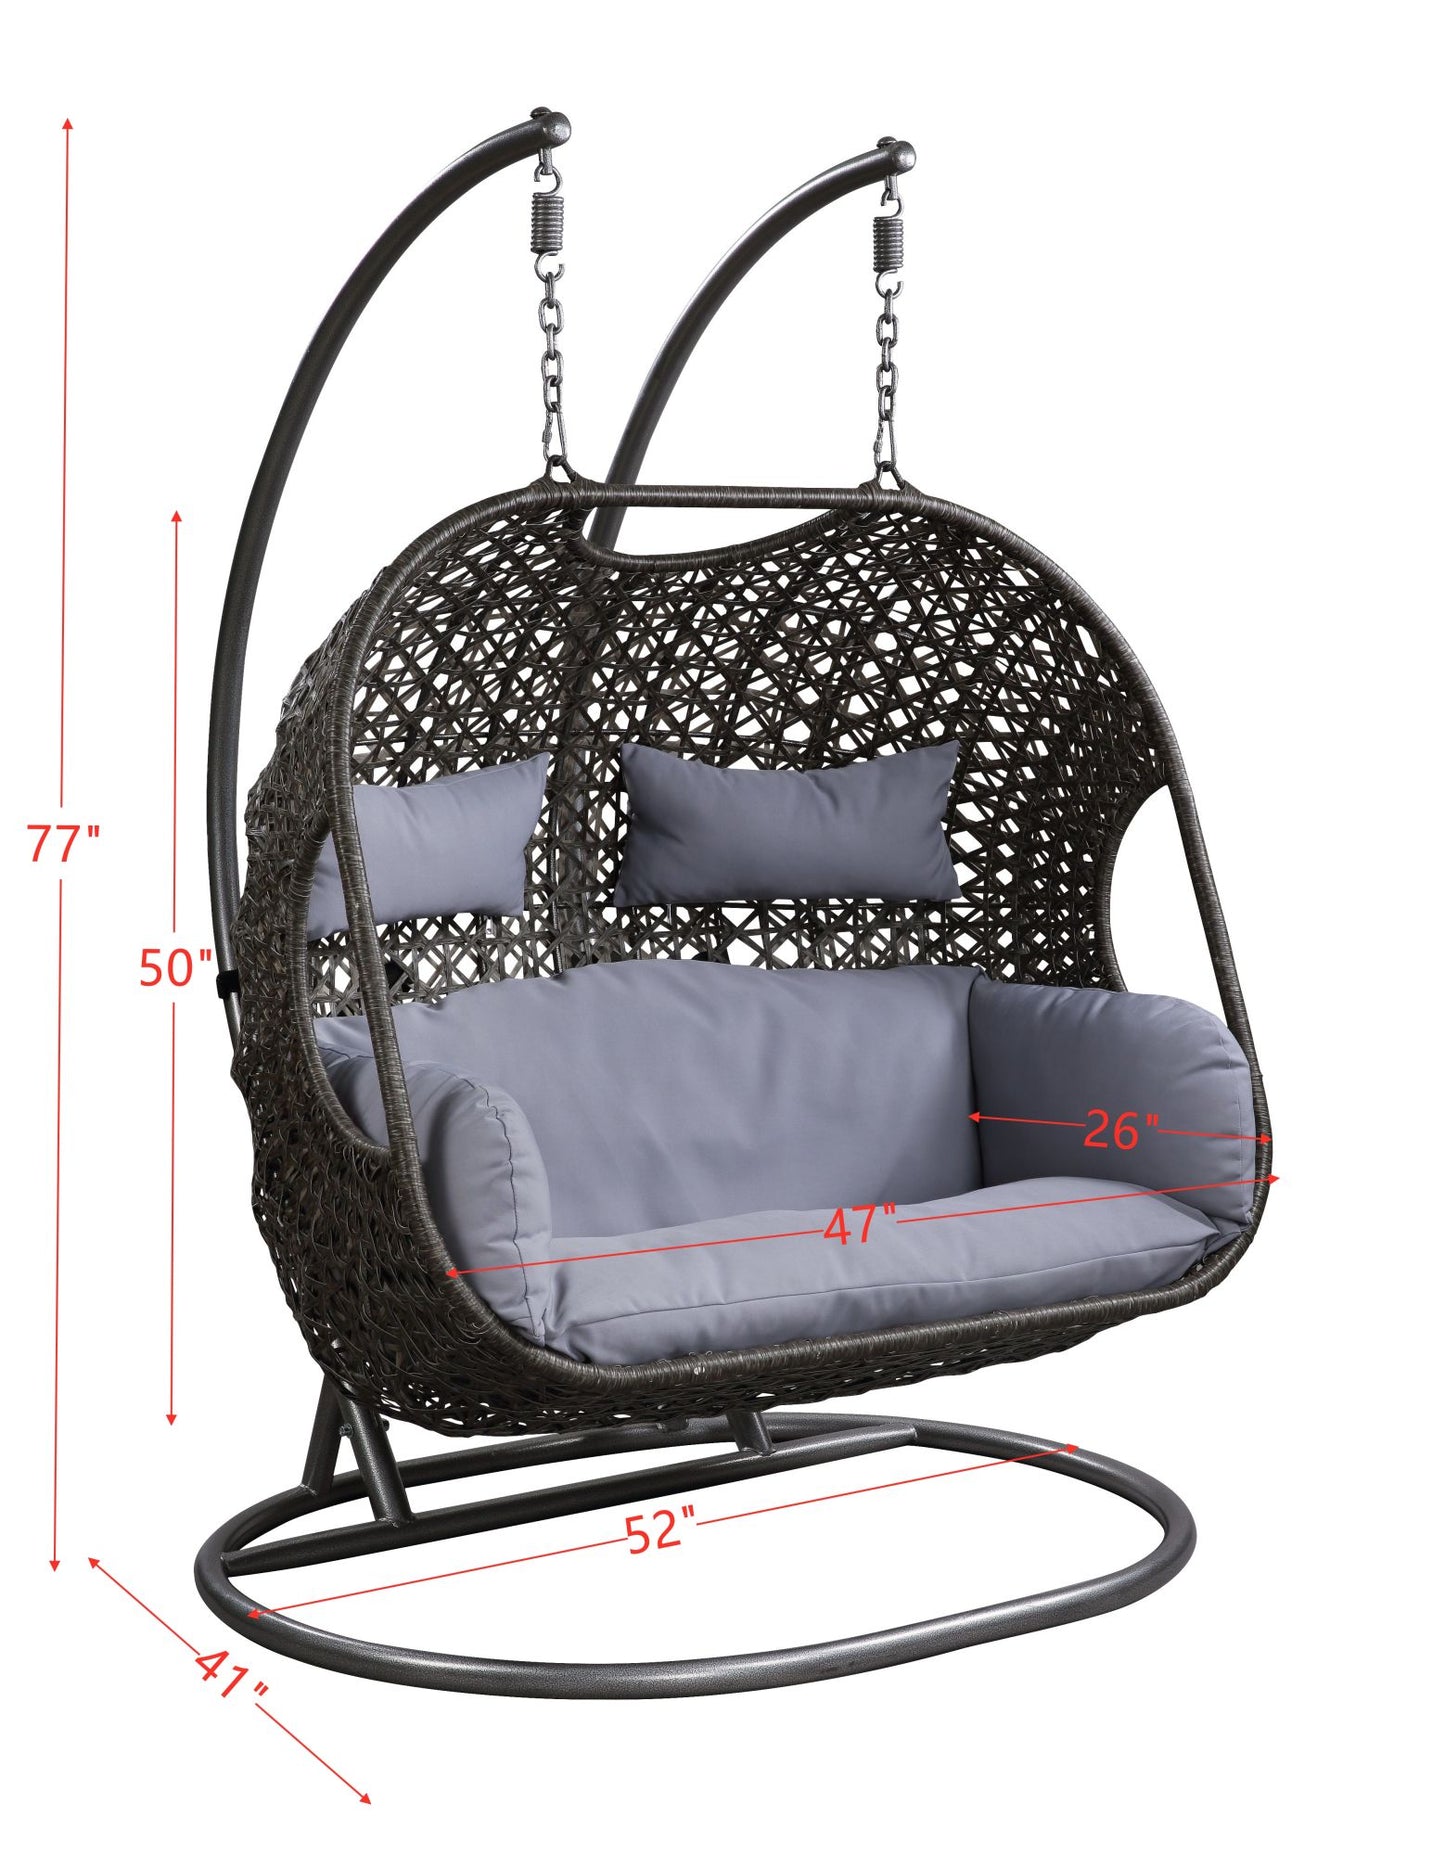 Patio Swing Chair with Stand and Fabric Cusions